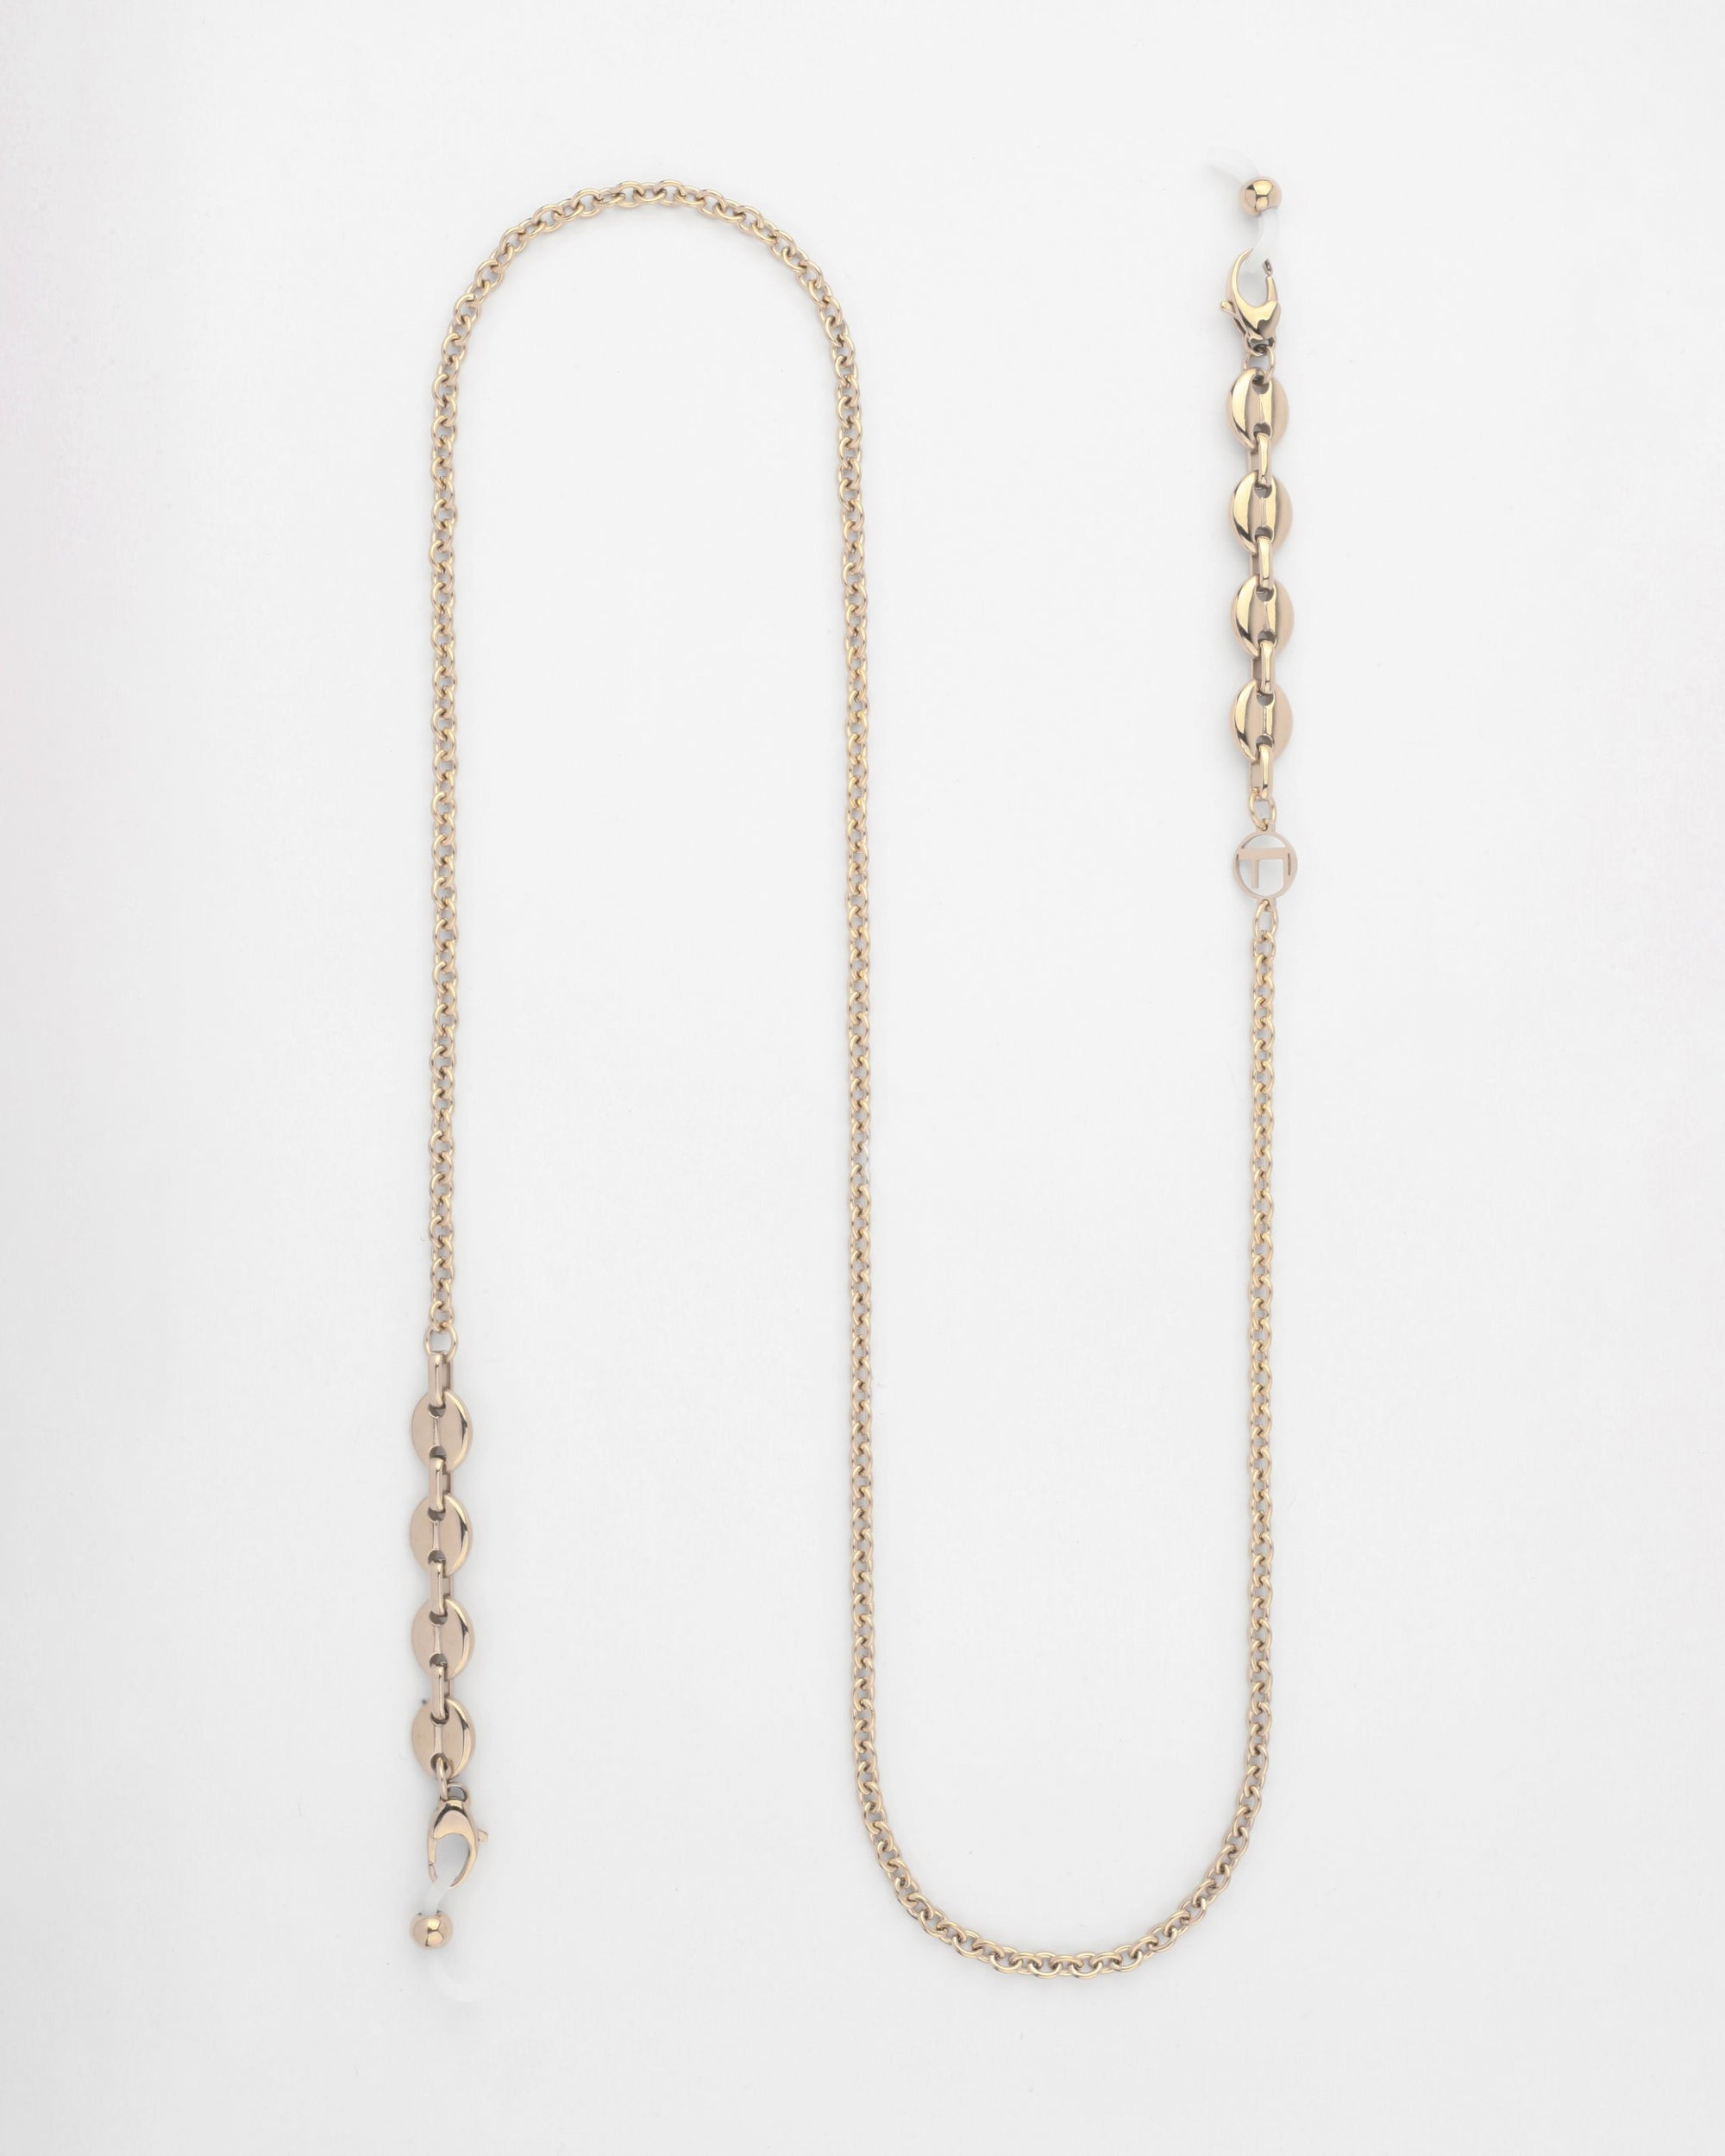 A For Art&#39;s Sake® Hackney Glasses Chain laid out in an S-shape against a white background. The chain features a series of interconnected oval links on one end and a small clasp on the other, accented with a stylish freshwater pearl detail.